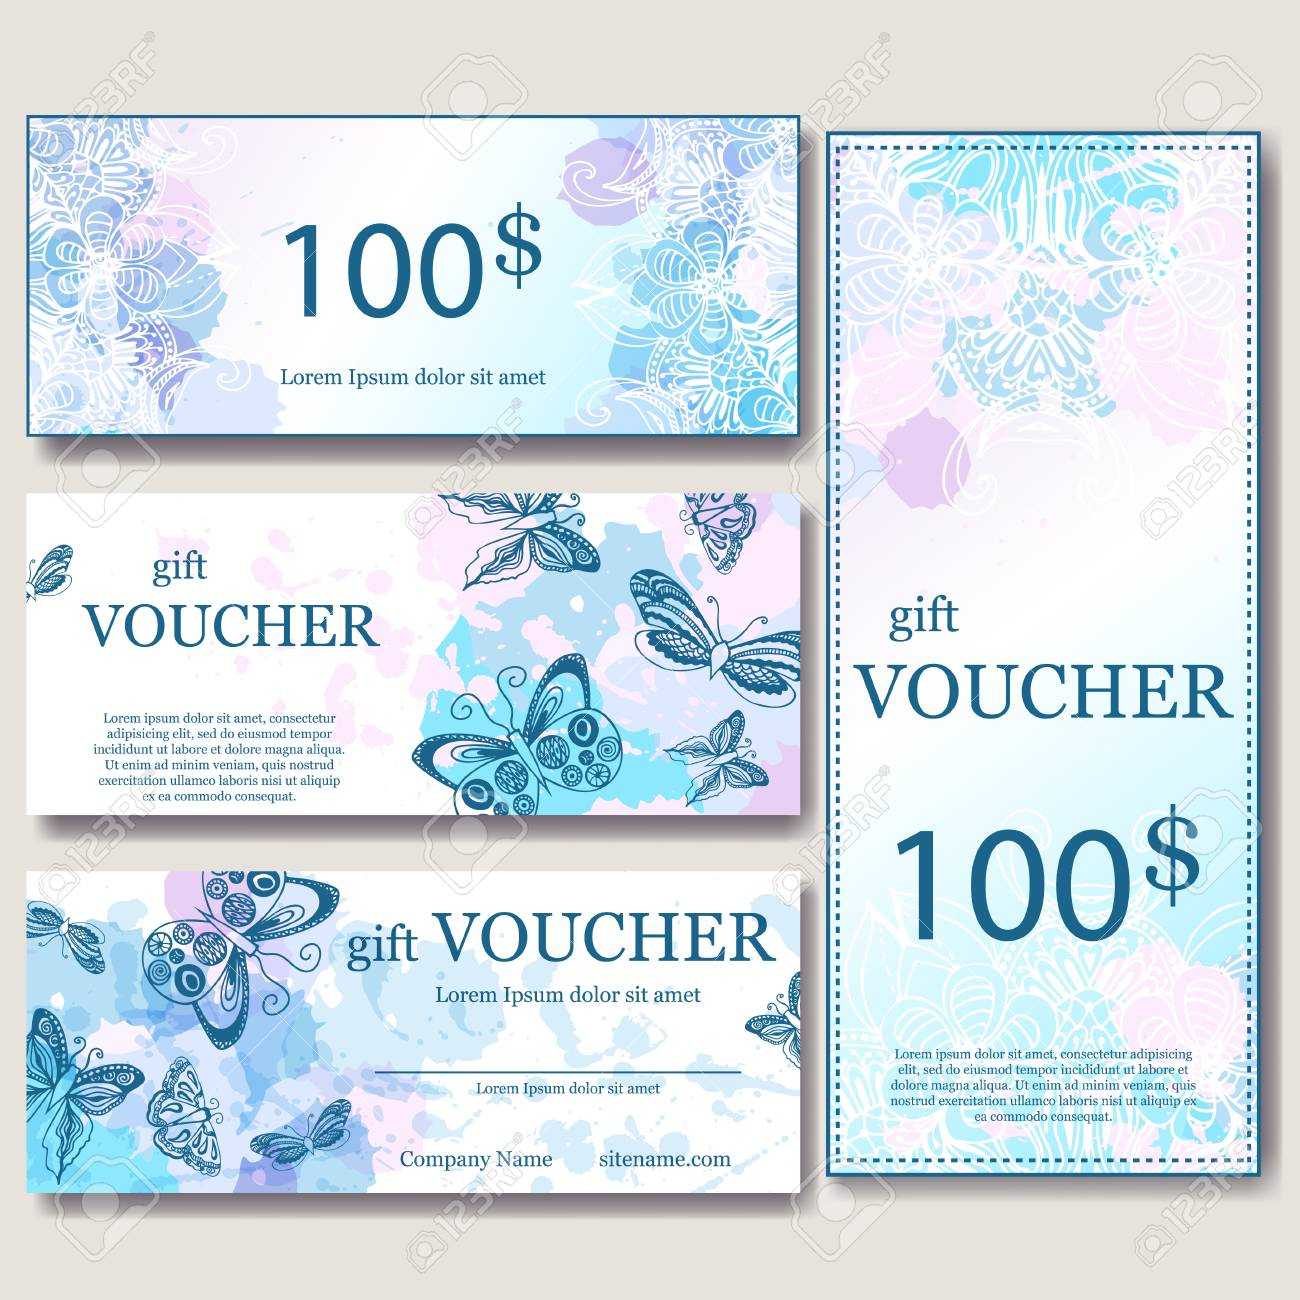 Gift Voucher Template With Mandala. Design Certificate For Sport.. Pertaining To Magazine Subscription Gift Certificate Template